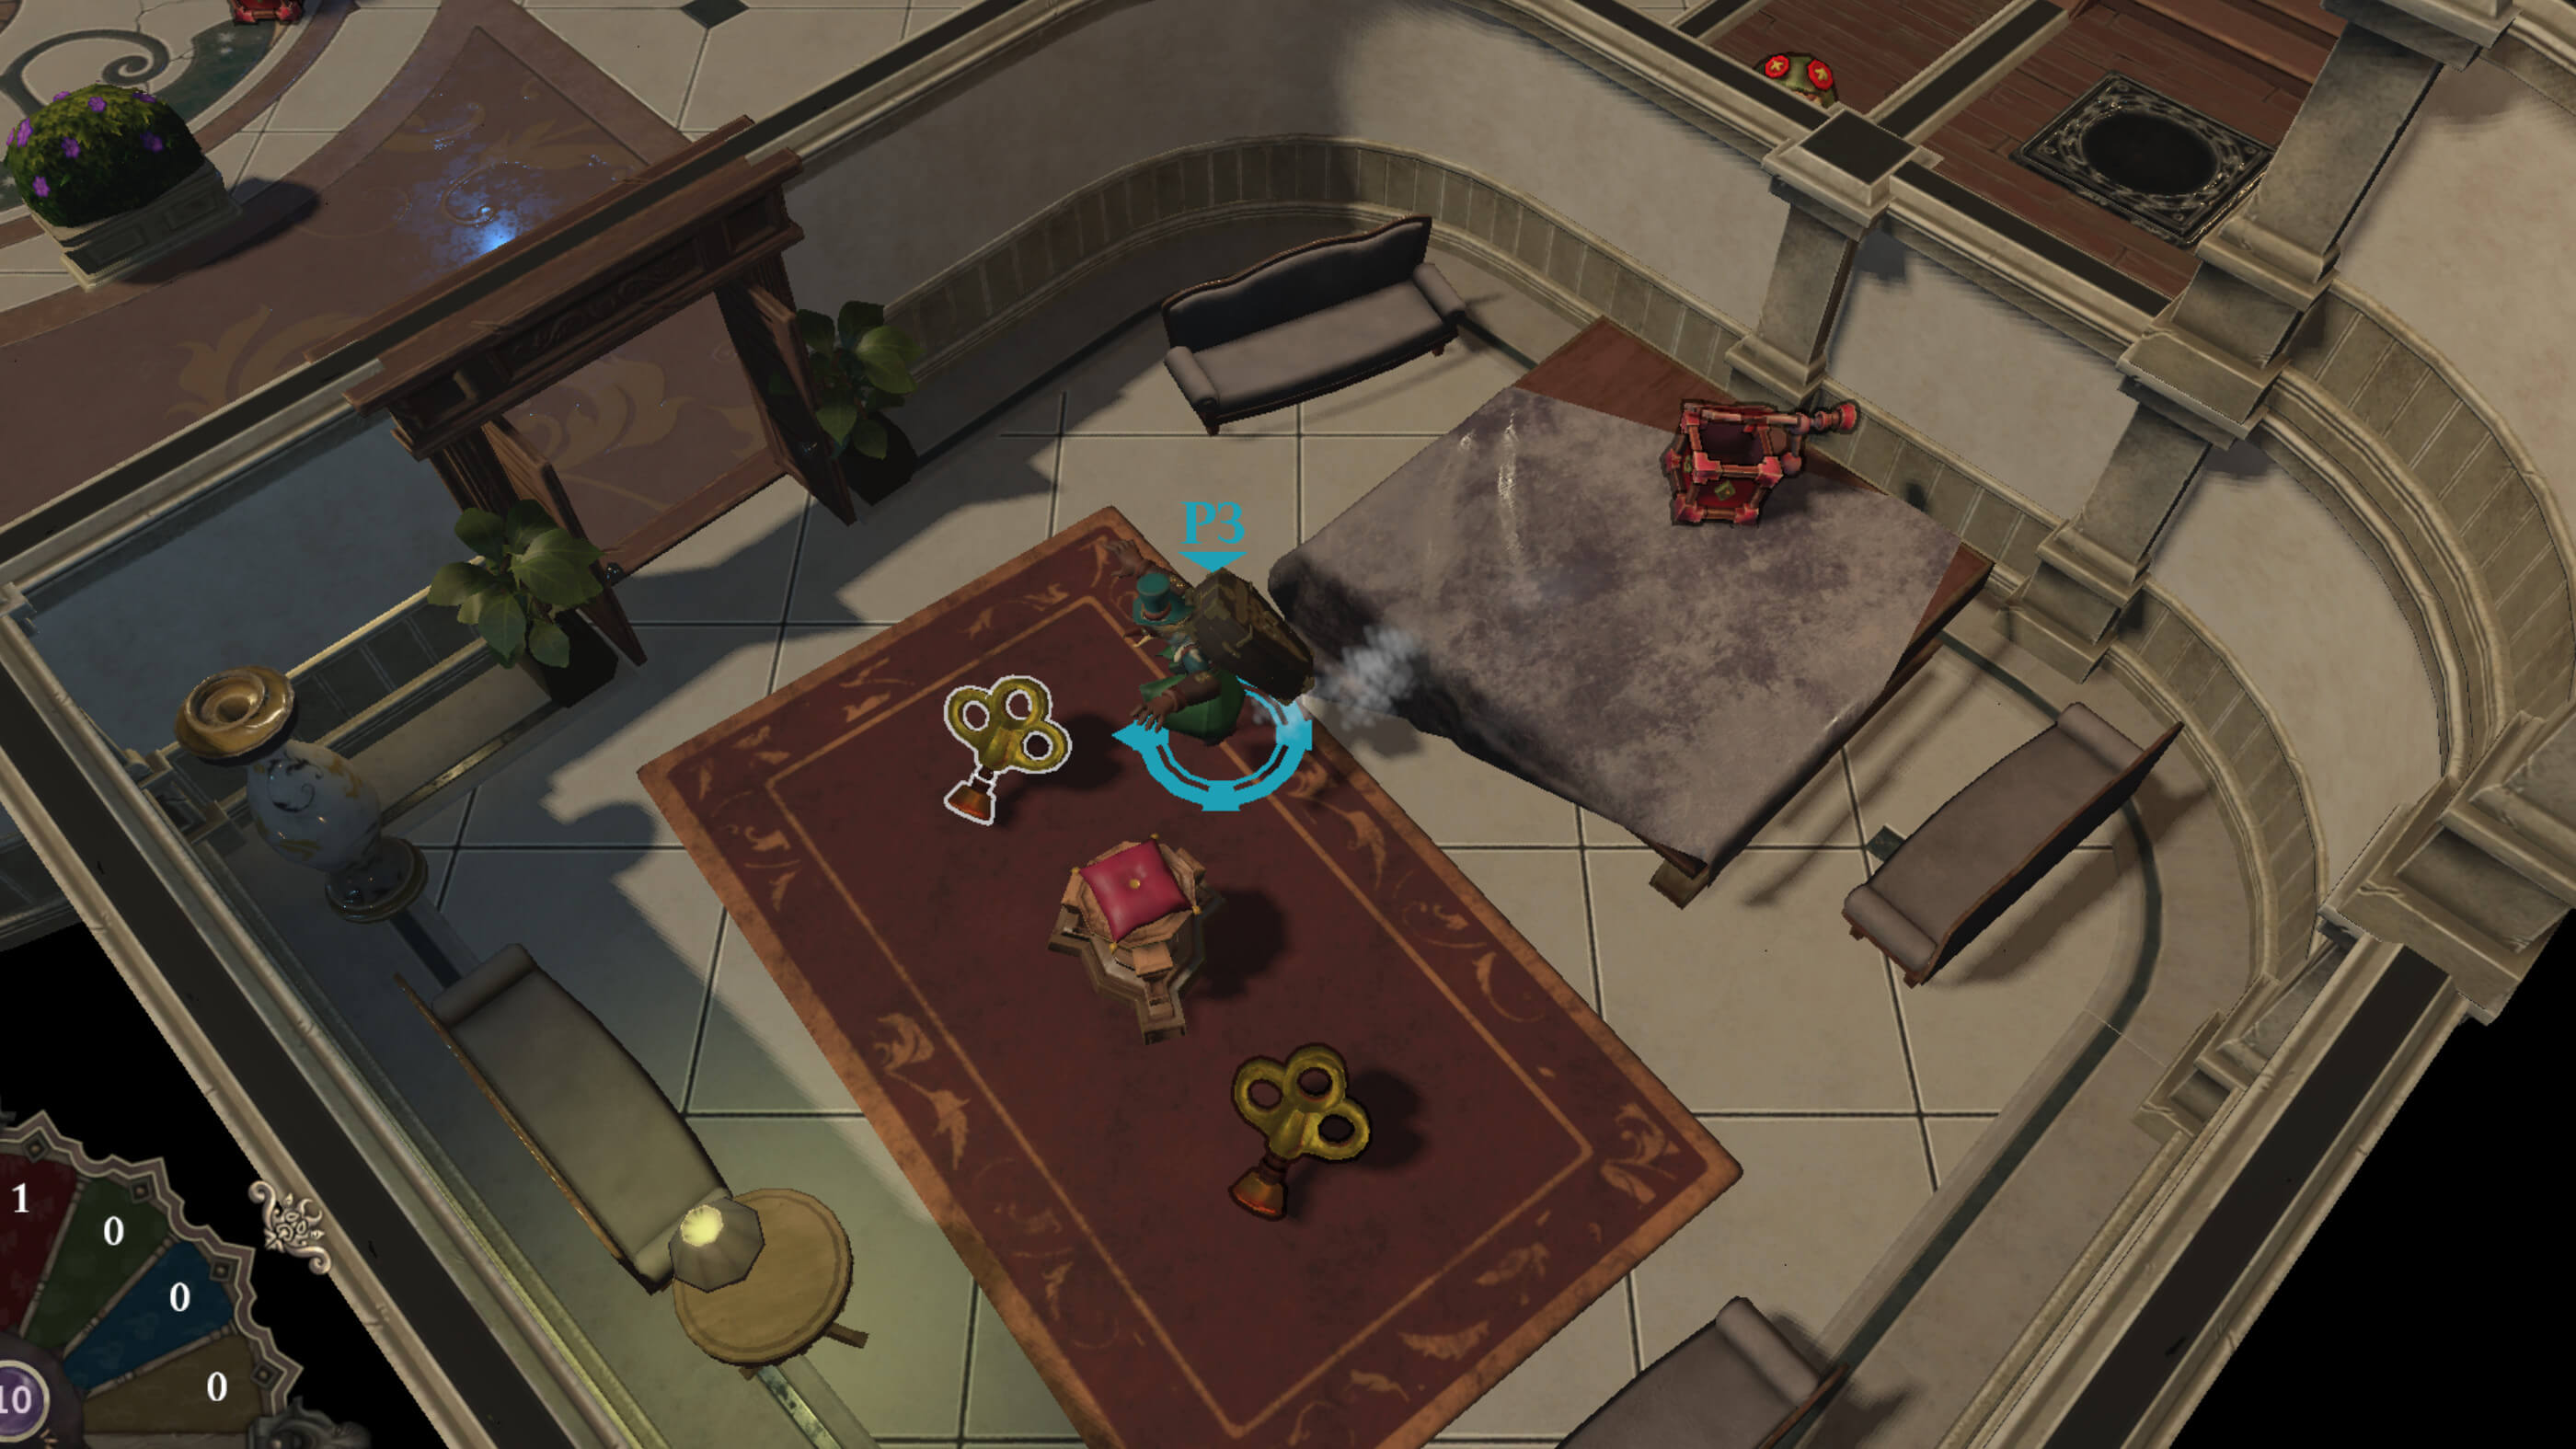 Top-down view of player running to collect an item in a small room